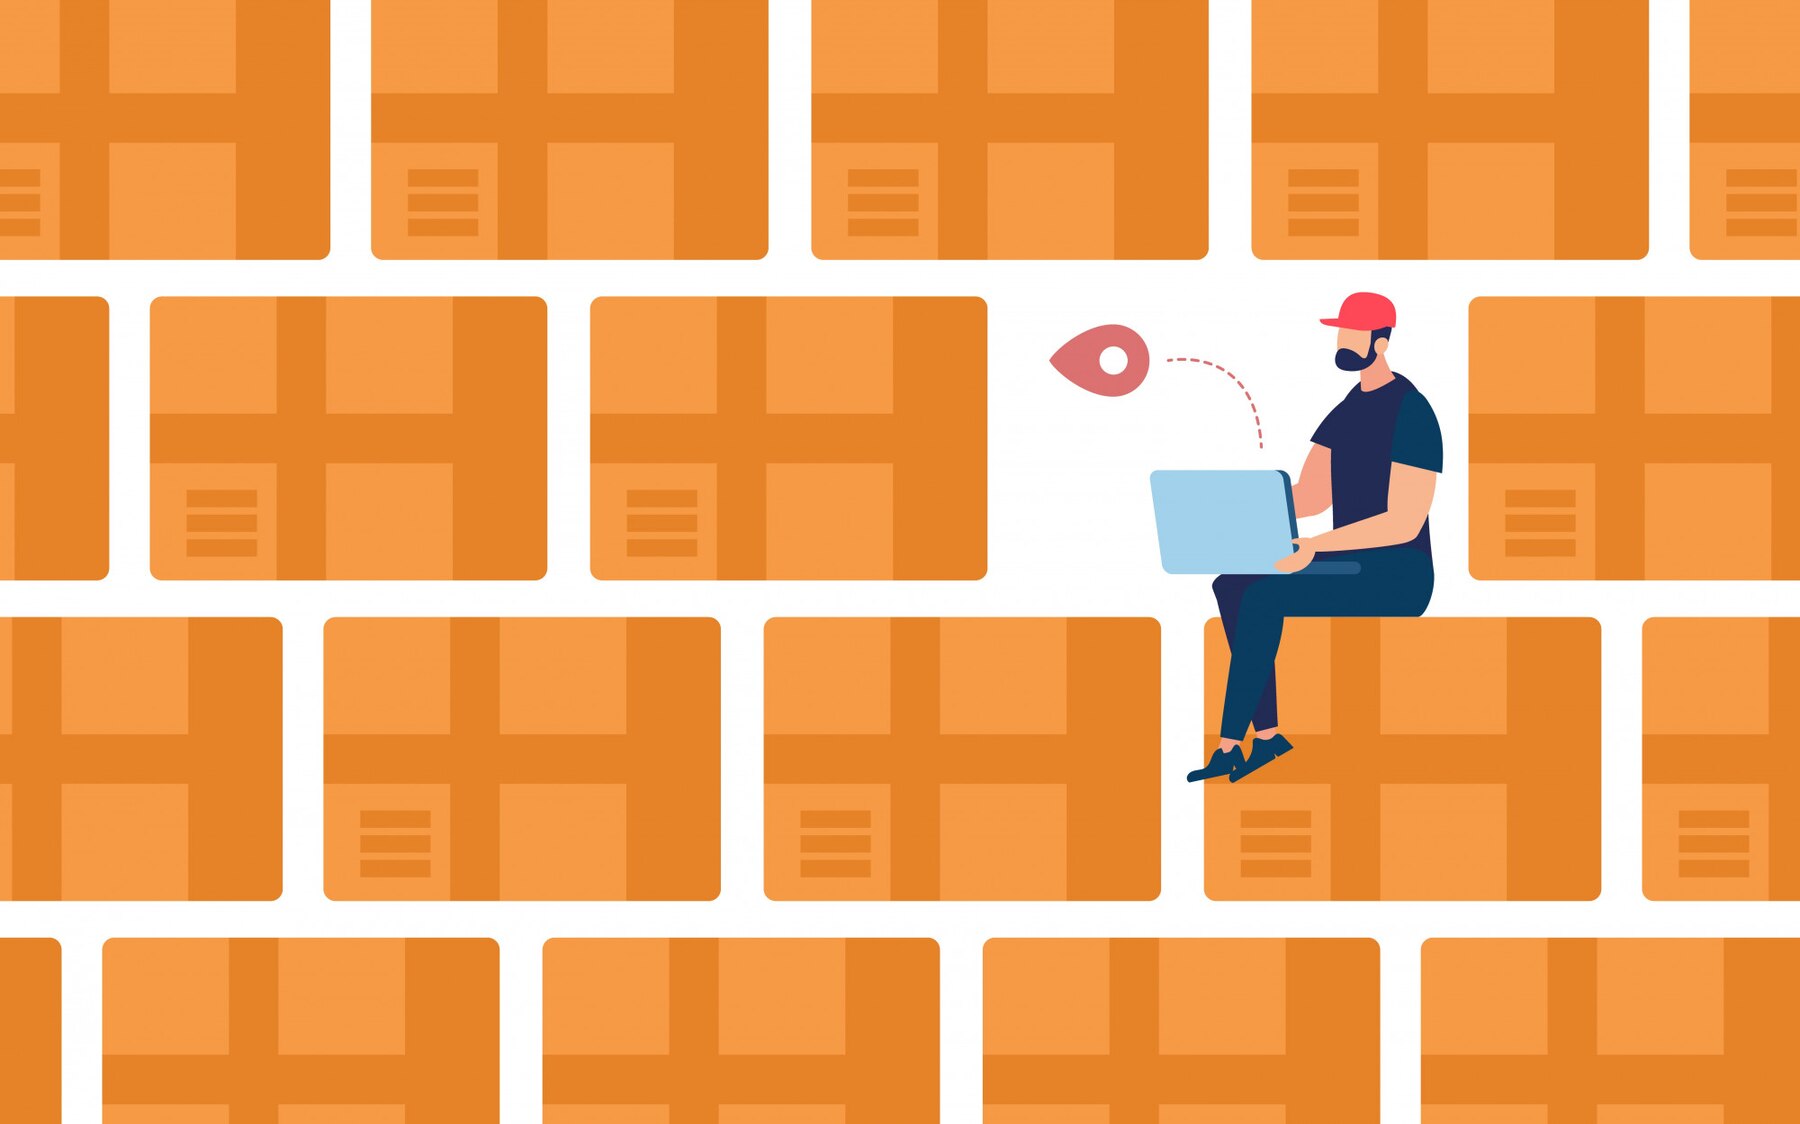 Ship your products to Amazon Fulfillment Centers